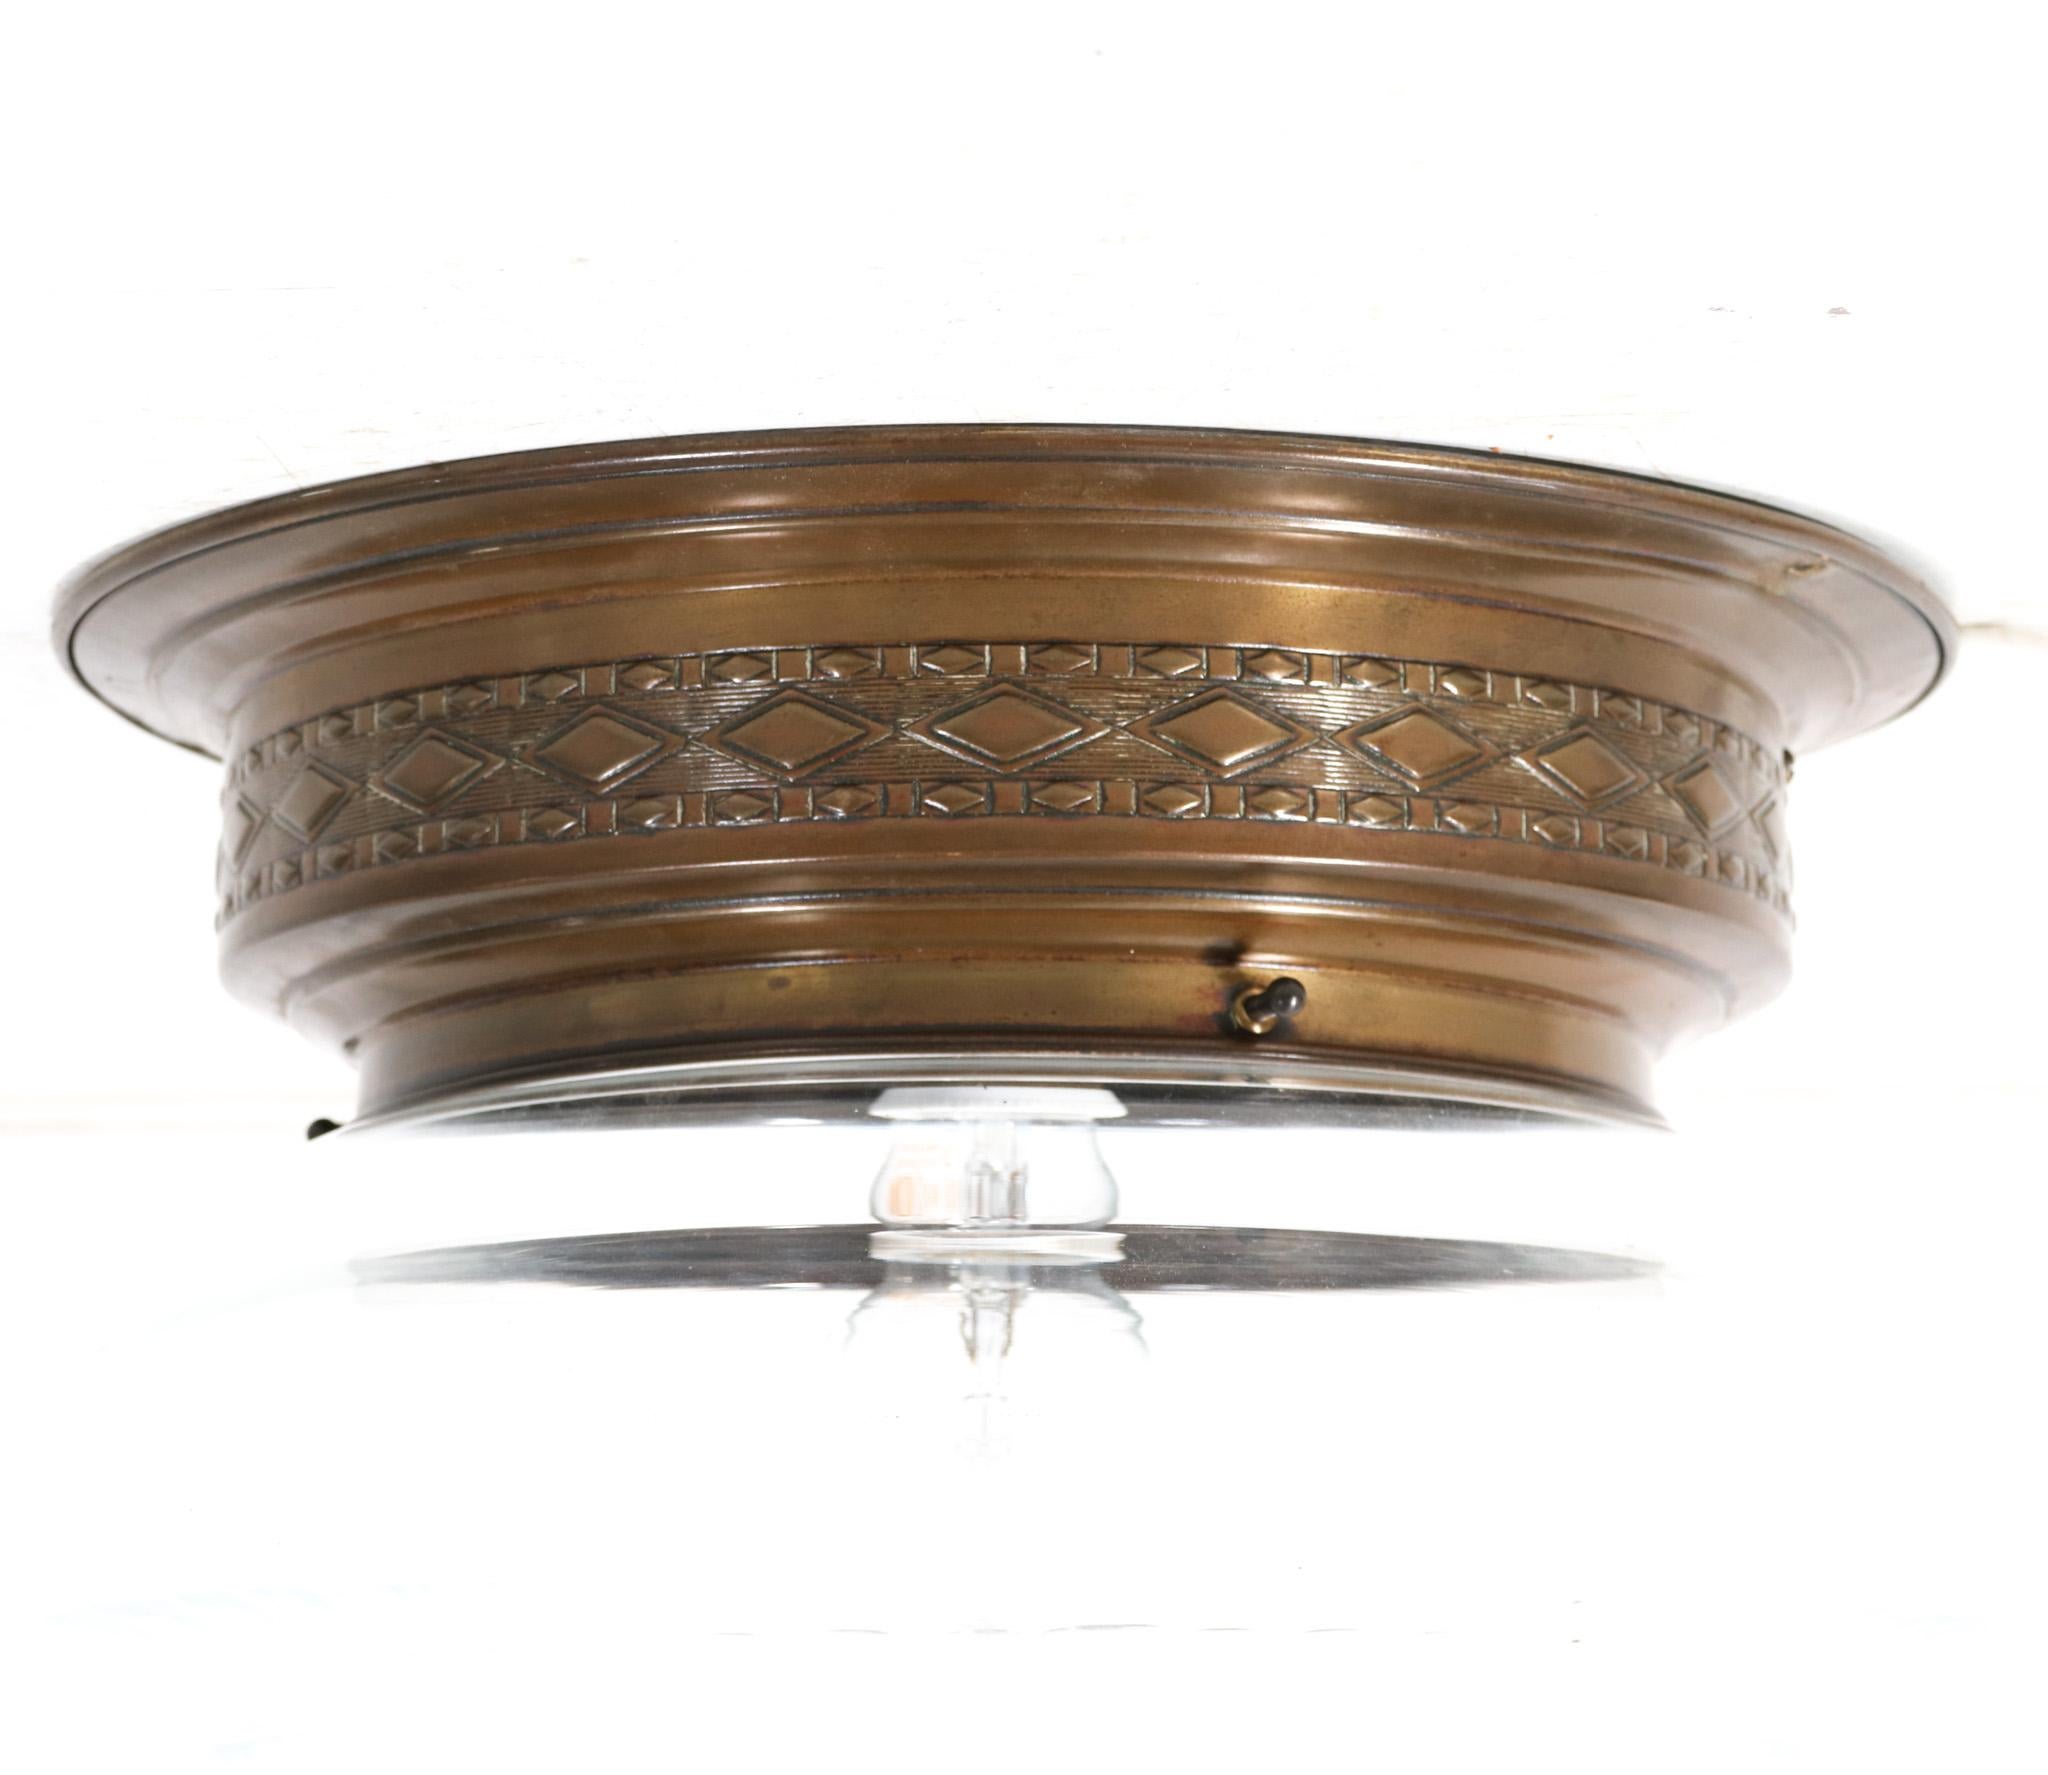 Stunning Art Nouveau flush mount ceiling light. Striking French design from the 1900s. Original patinated brass frame with original hand blown cut glass shade. Rewired with one original socket for E-27 light bulb. This wonderful Art Nouveau flush